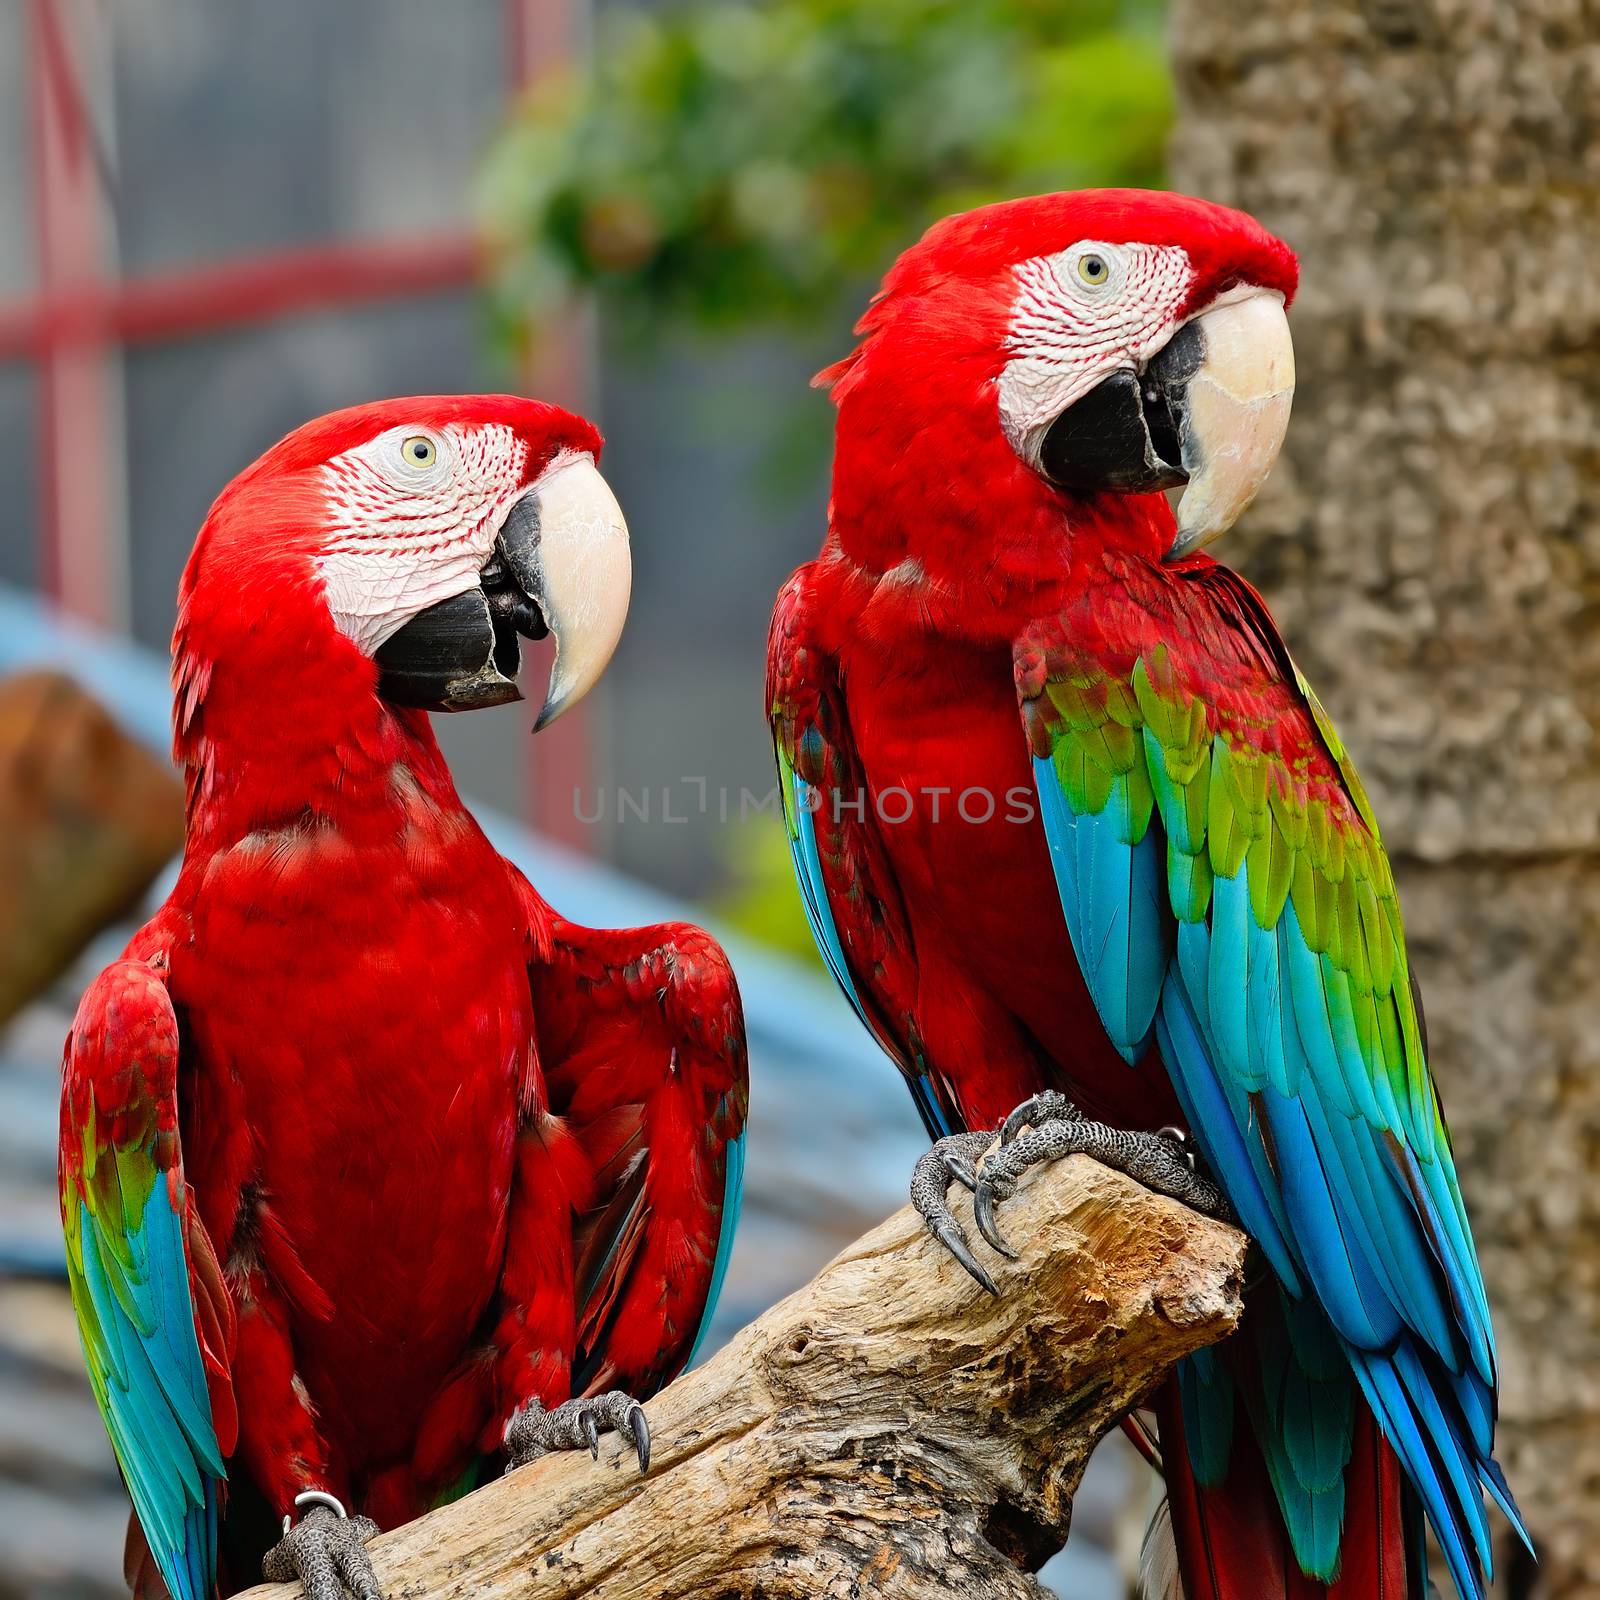 Lover of colorful Greenwinged Macaw aviary, sitting on the log